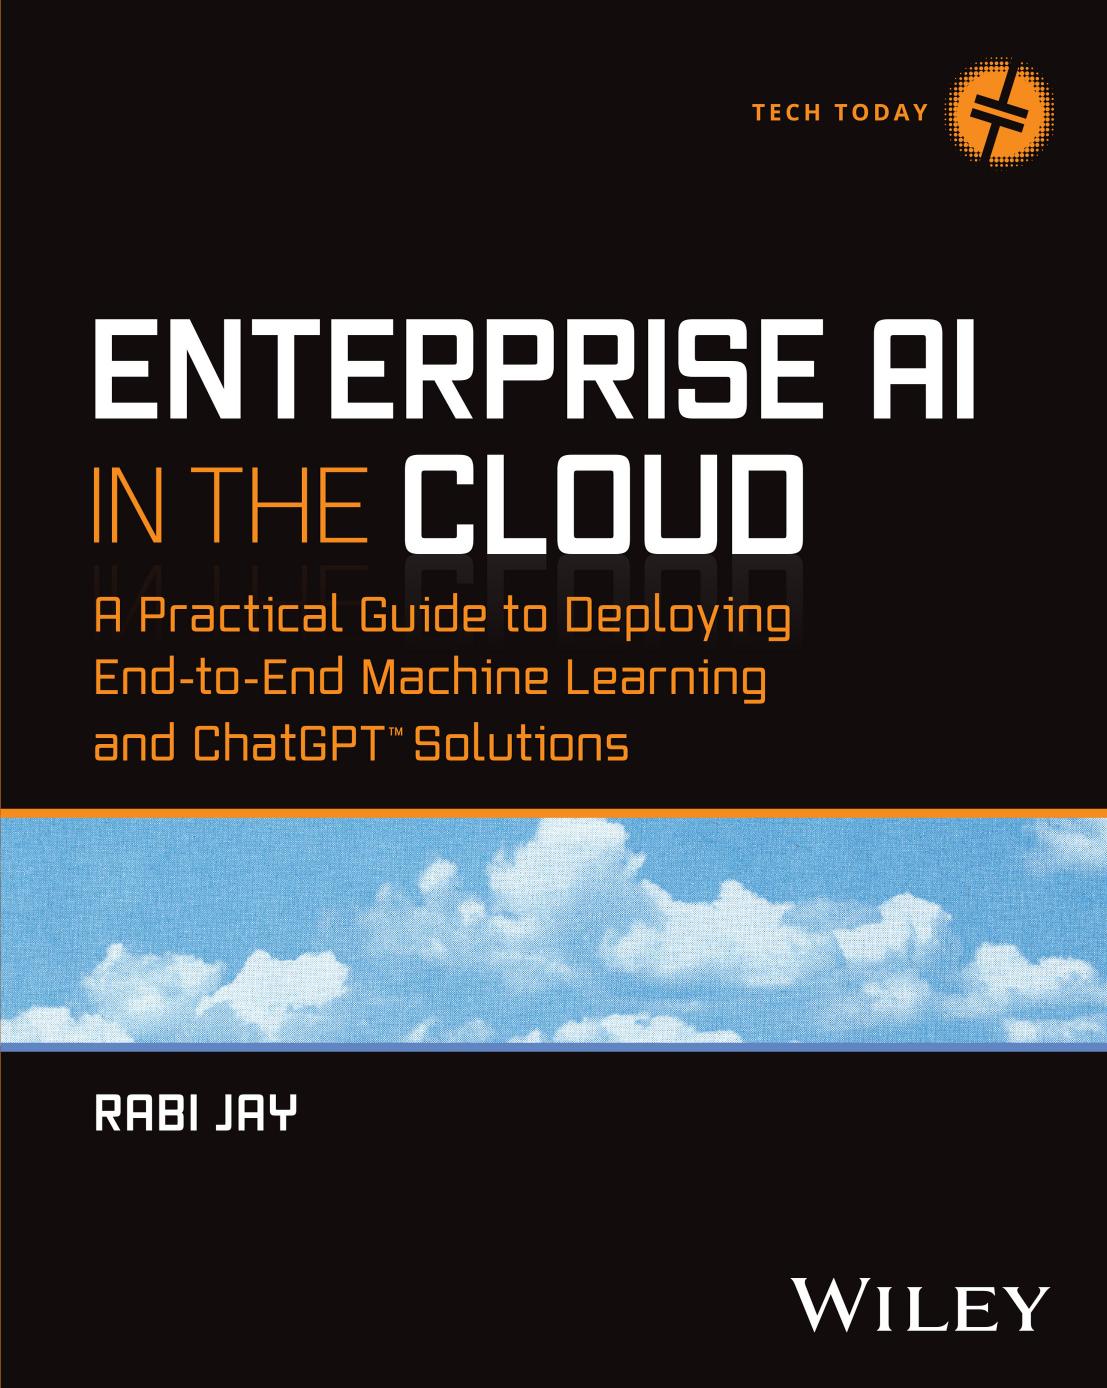 Enterprise AI in the Cloud: A Practical Guide to Deploying End-To-End Machine Learning, ChatGPT, and Deep Learning Solutions